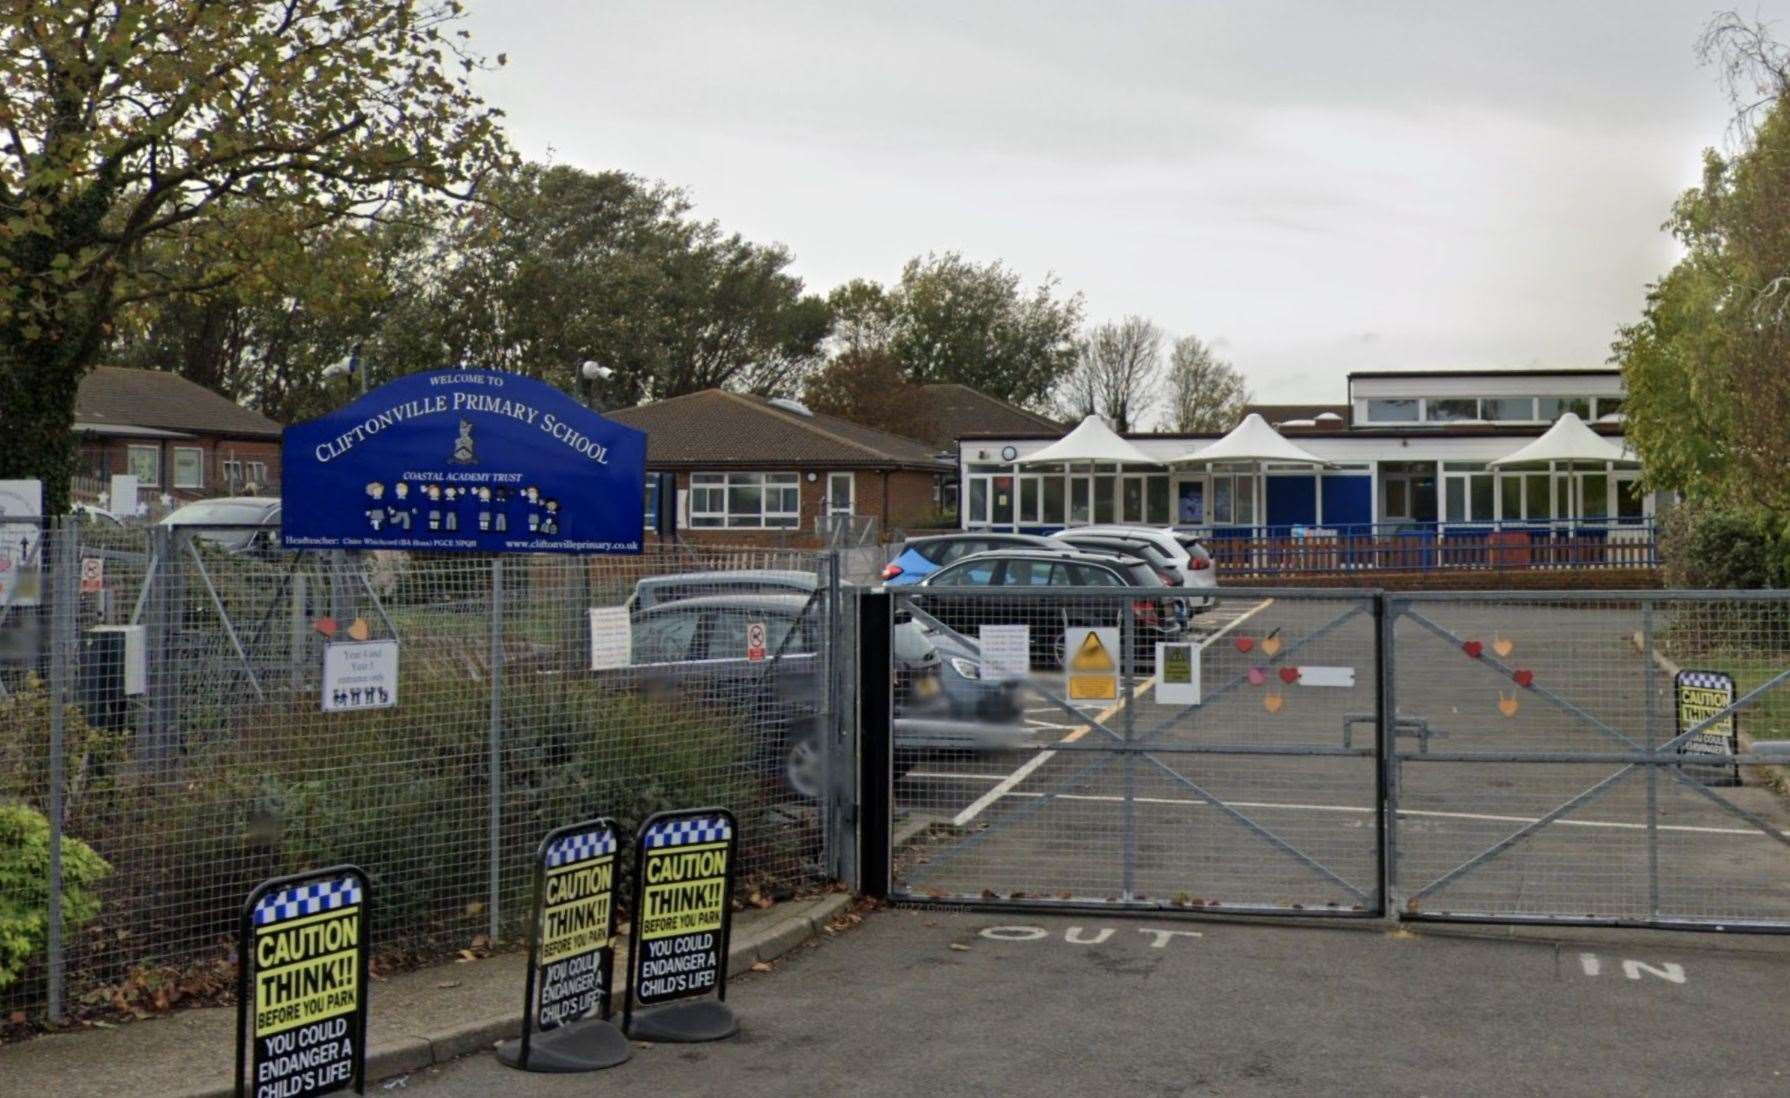 Cliftonville Primary School in Margate. Pic: Google